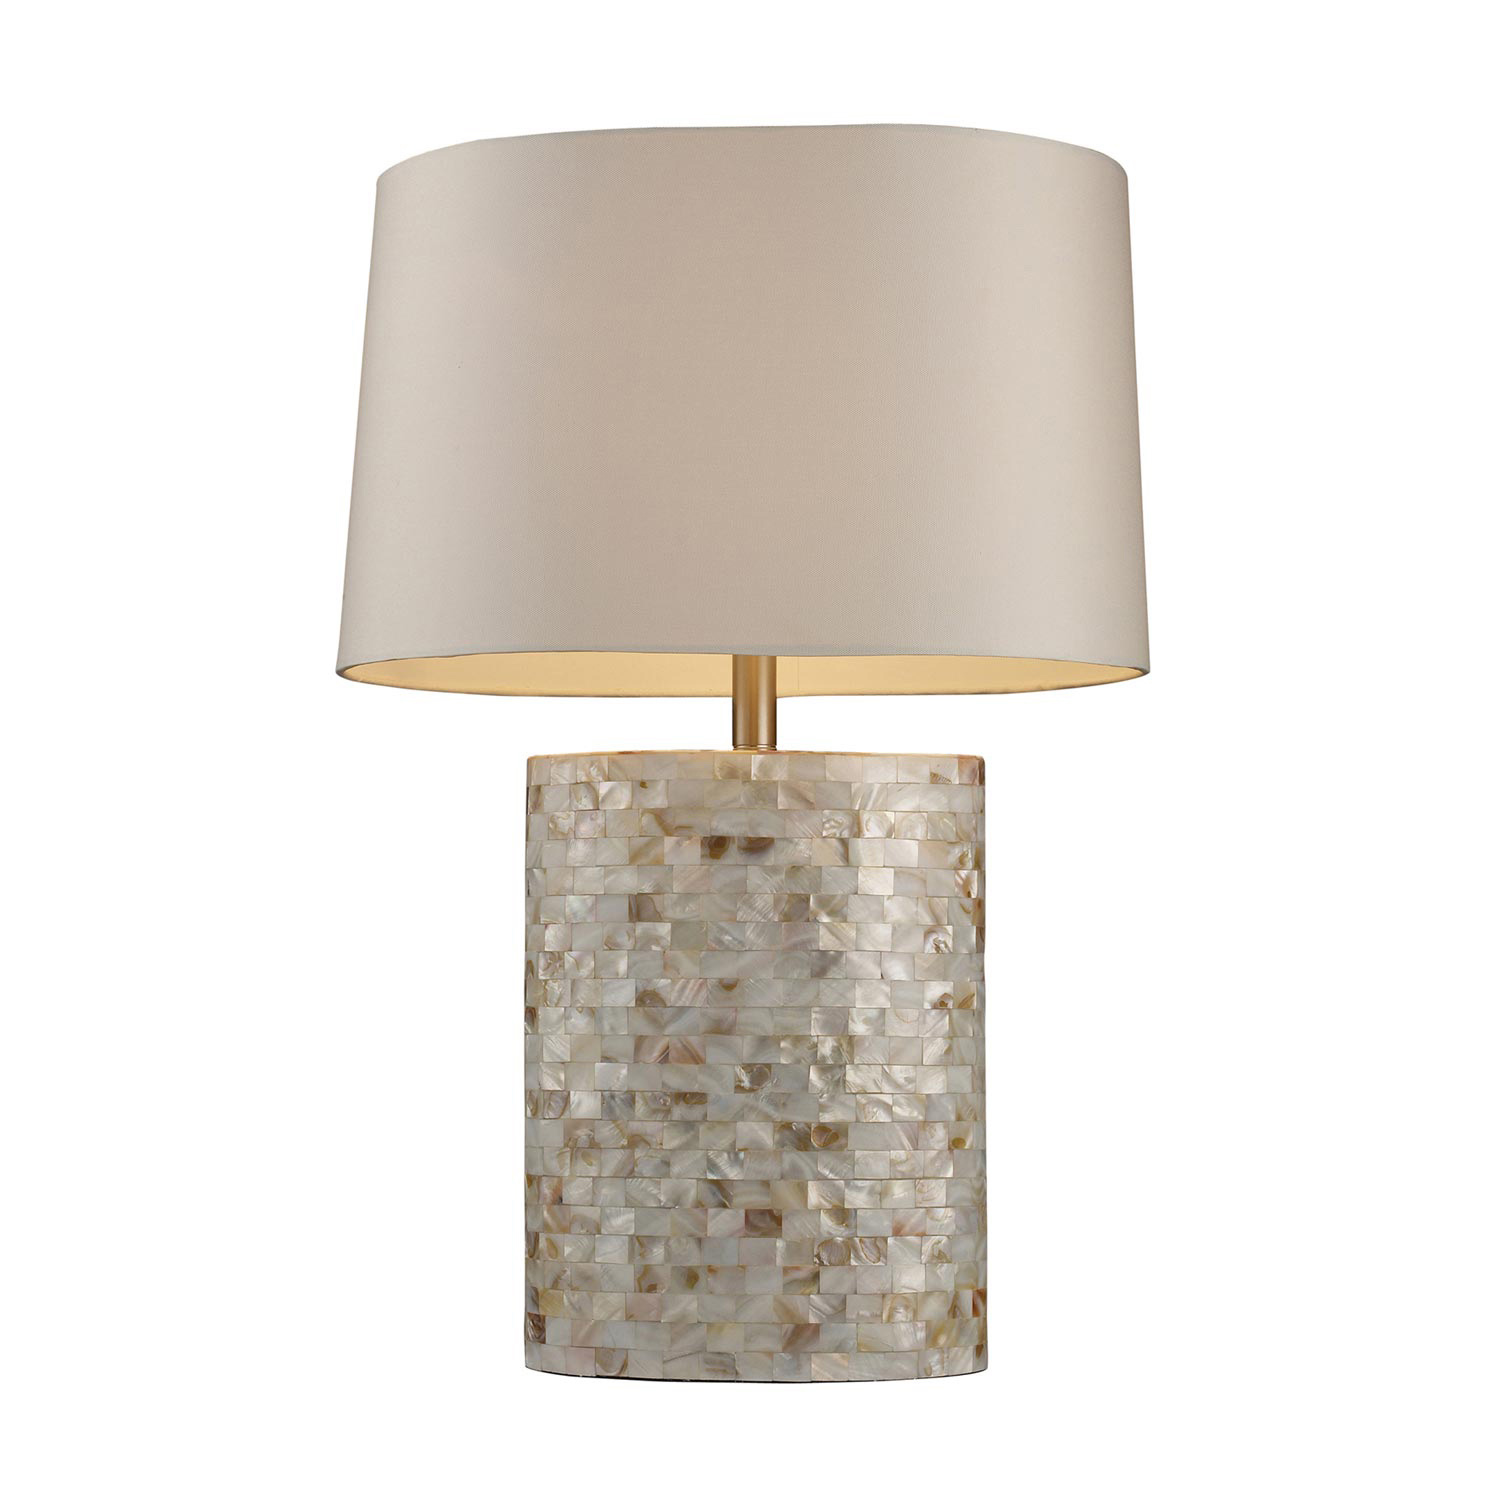 Elk Lighting D1413 Sunny Isles Table Lamp - Mother Of Pearl